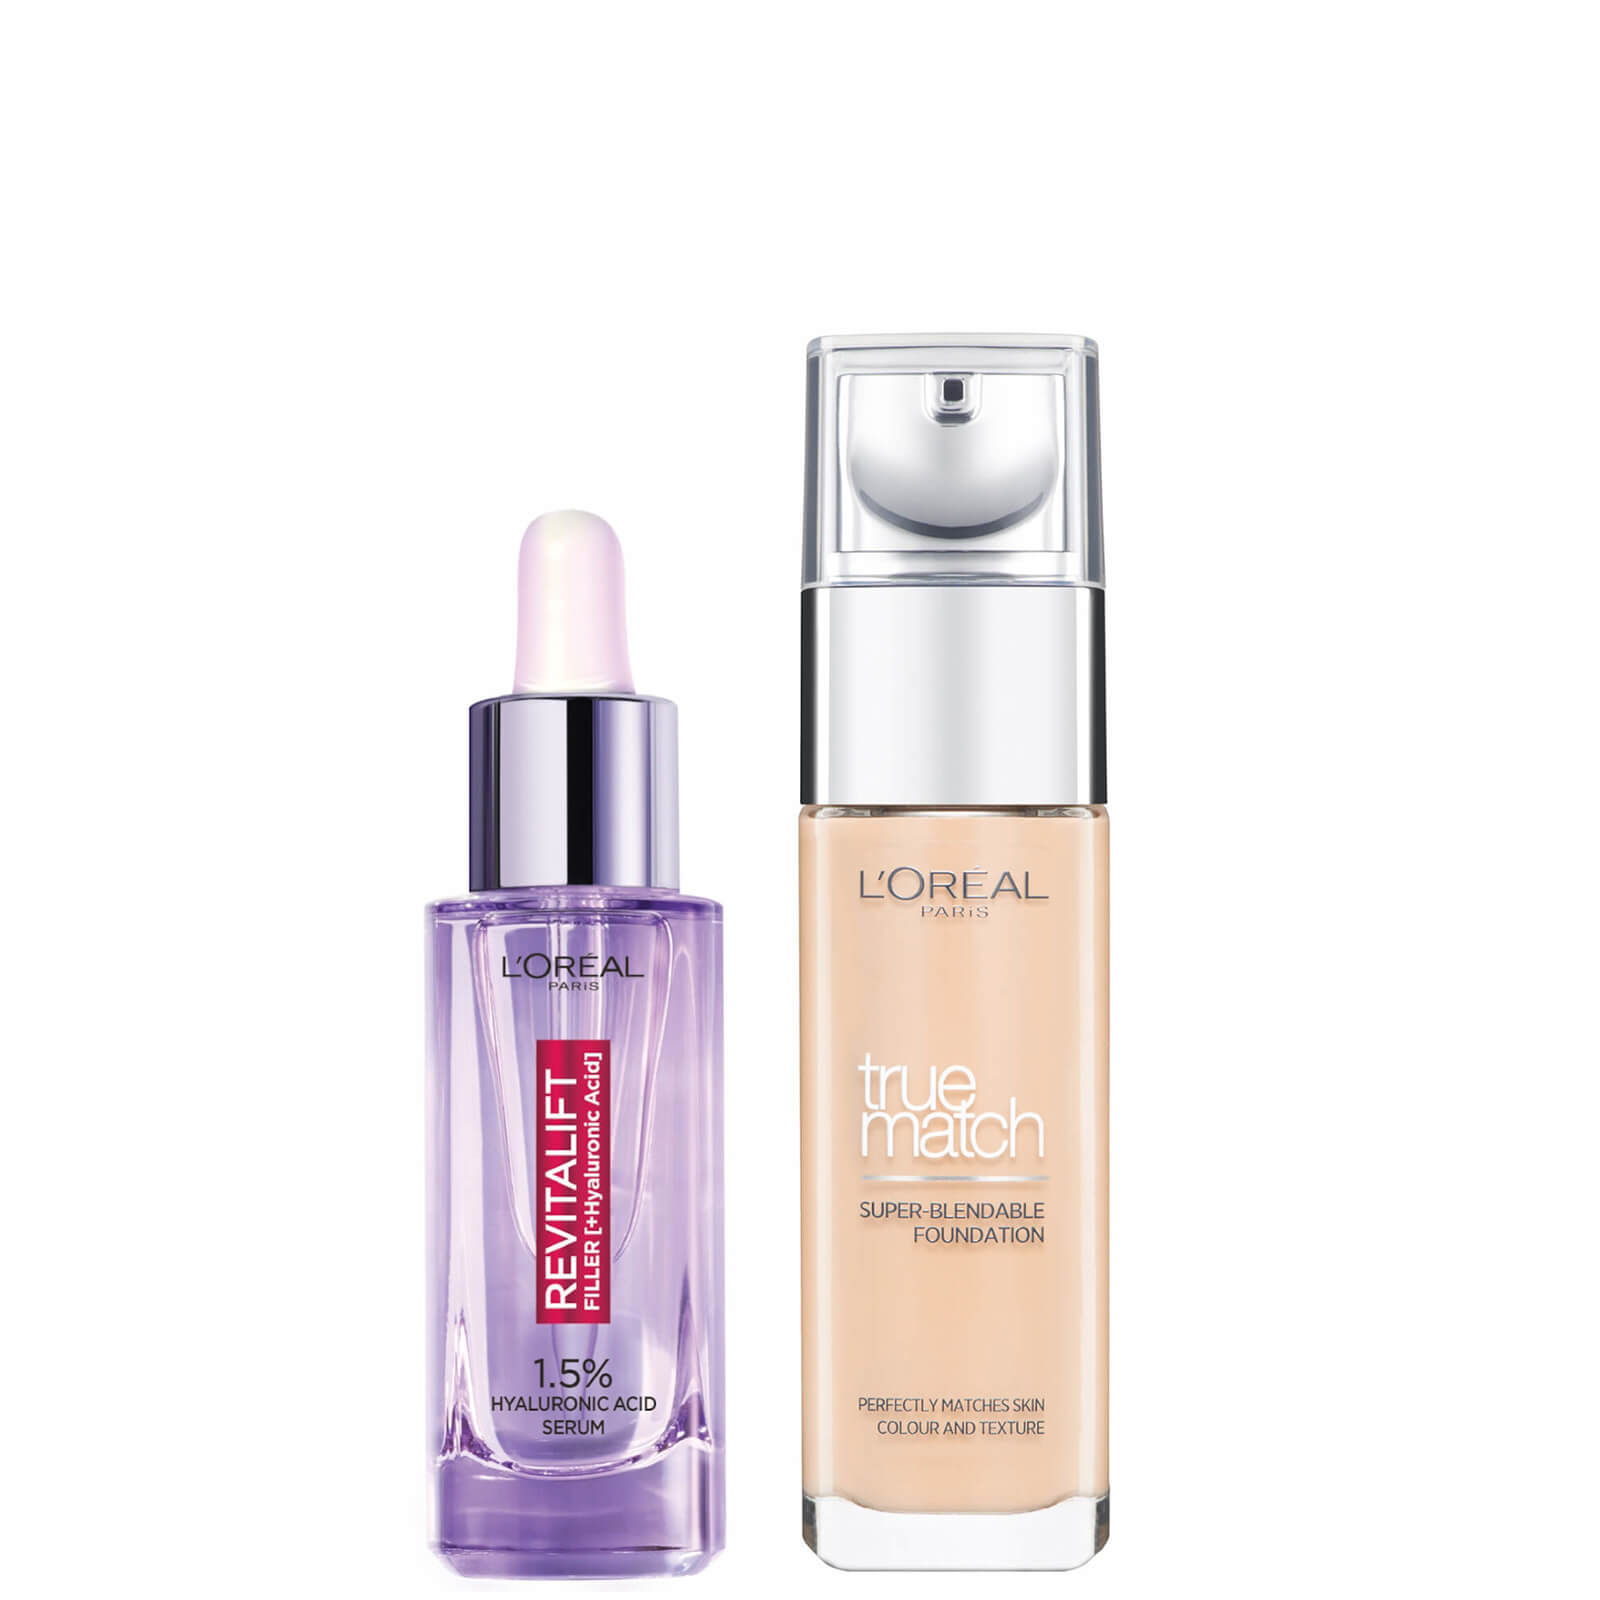 L’Oreal Paris Hyaluronic Acid Filler Serum and True Match Hyaluronic Acid Foundation Duo (Various Shades) - 3C Rose Beige